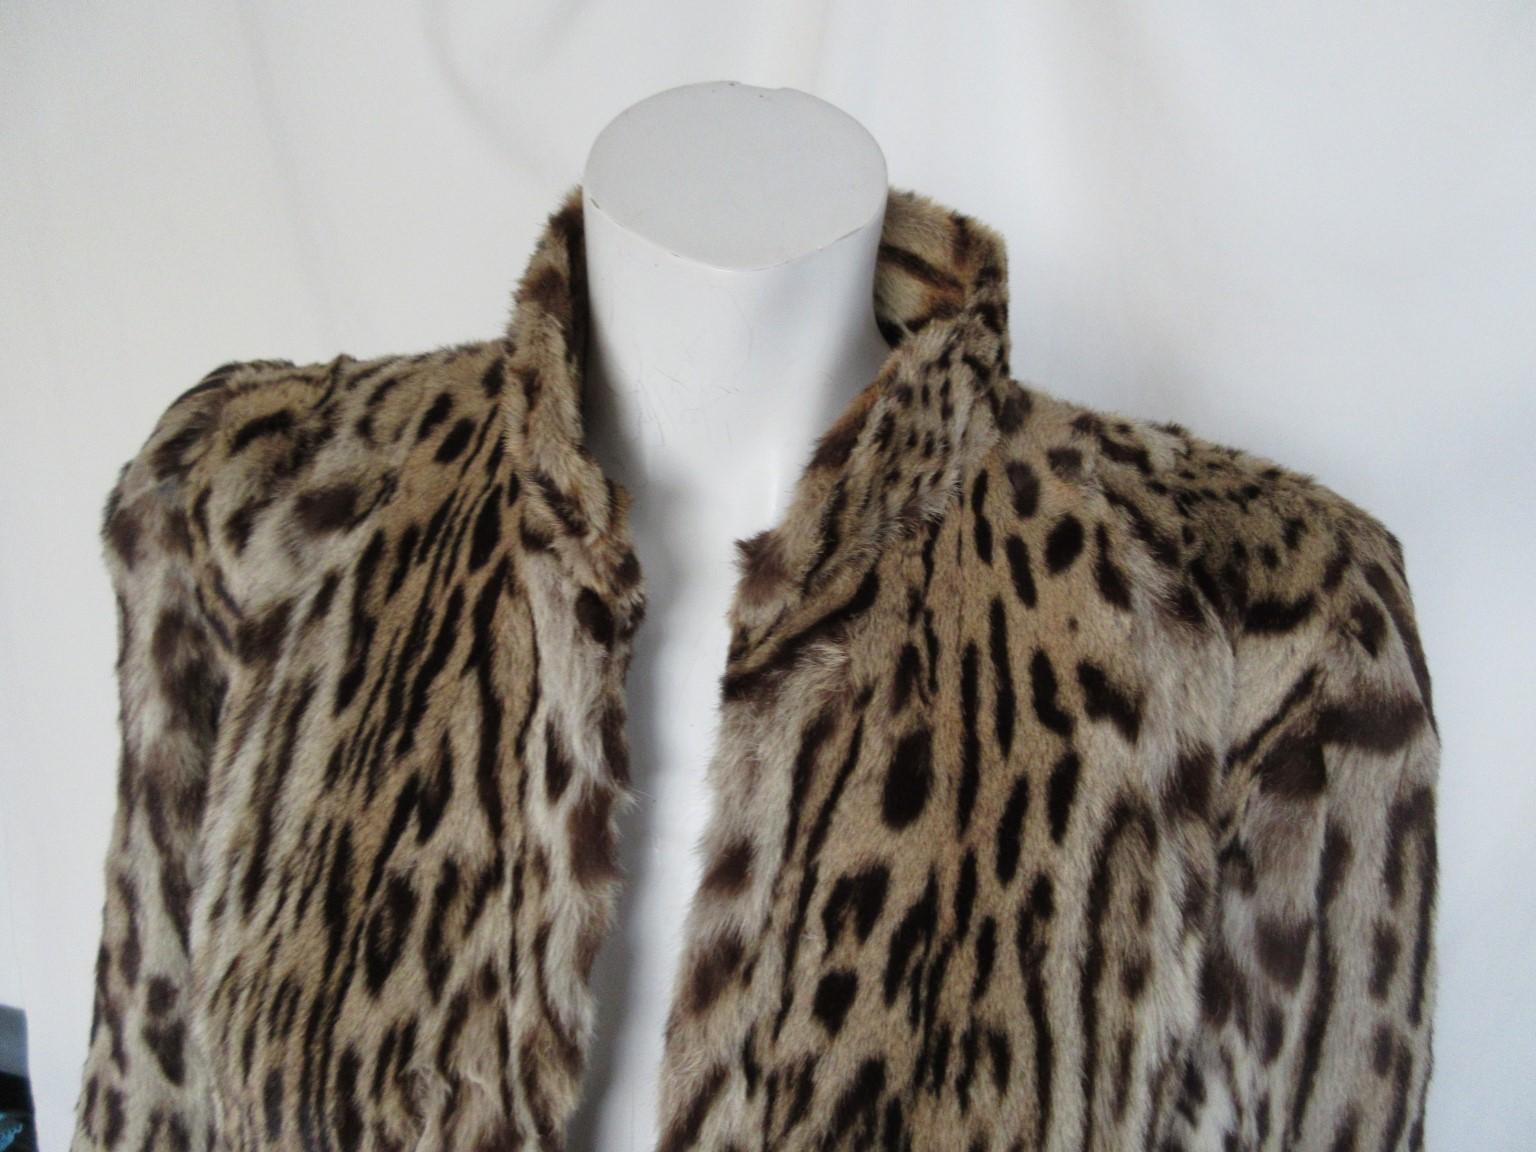 Rare vintage ocelot coat 

We offer more luxurious fur coats, view our frontstore

Details:
2 velvet lined pockets, no buttons
Vintage condition
Fully lined
Made circa 1940's
Size is around medium, please check measurements

Please note that vintage